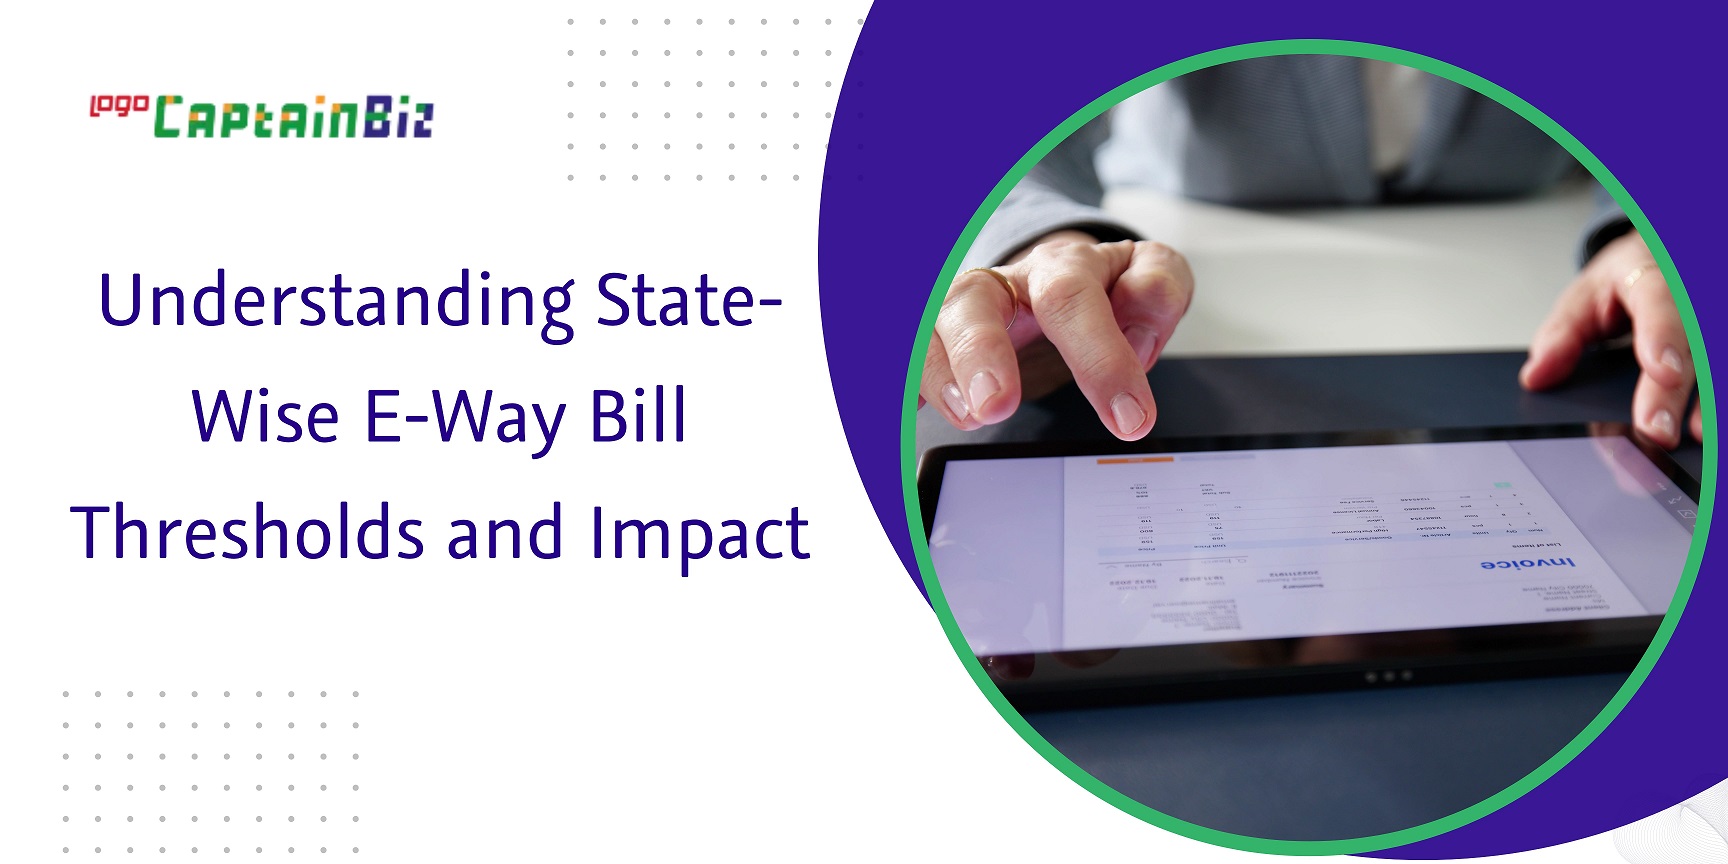 understanding state-wise e-way bill thresholds and impact